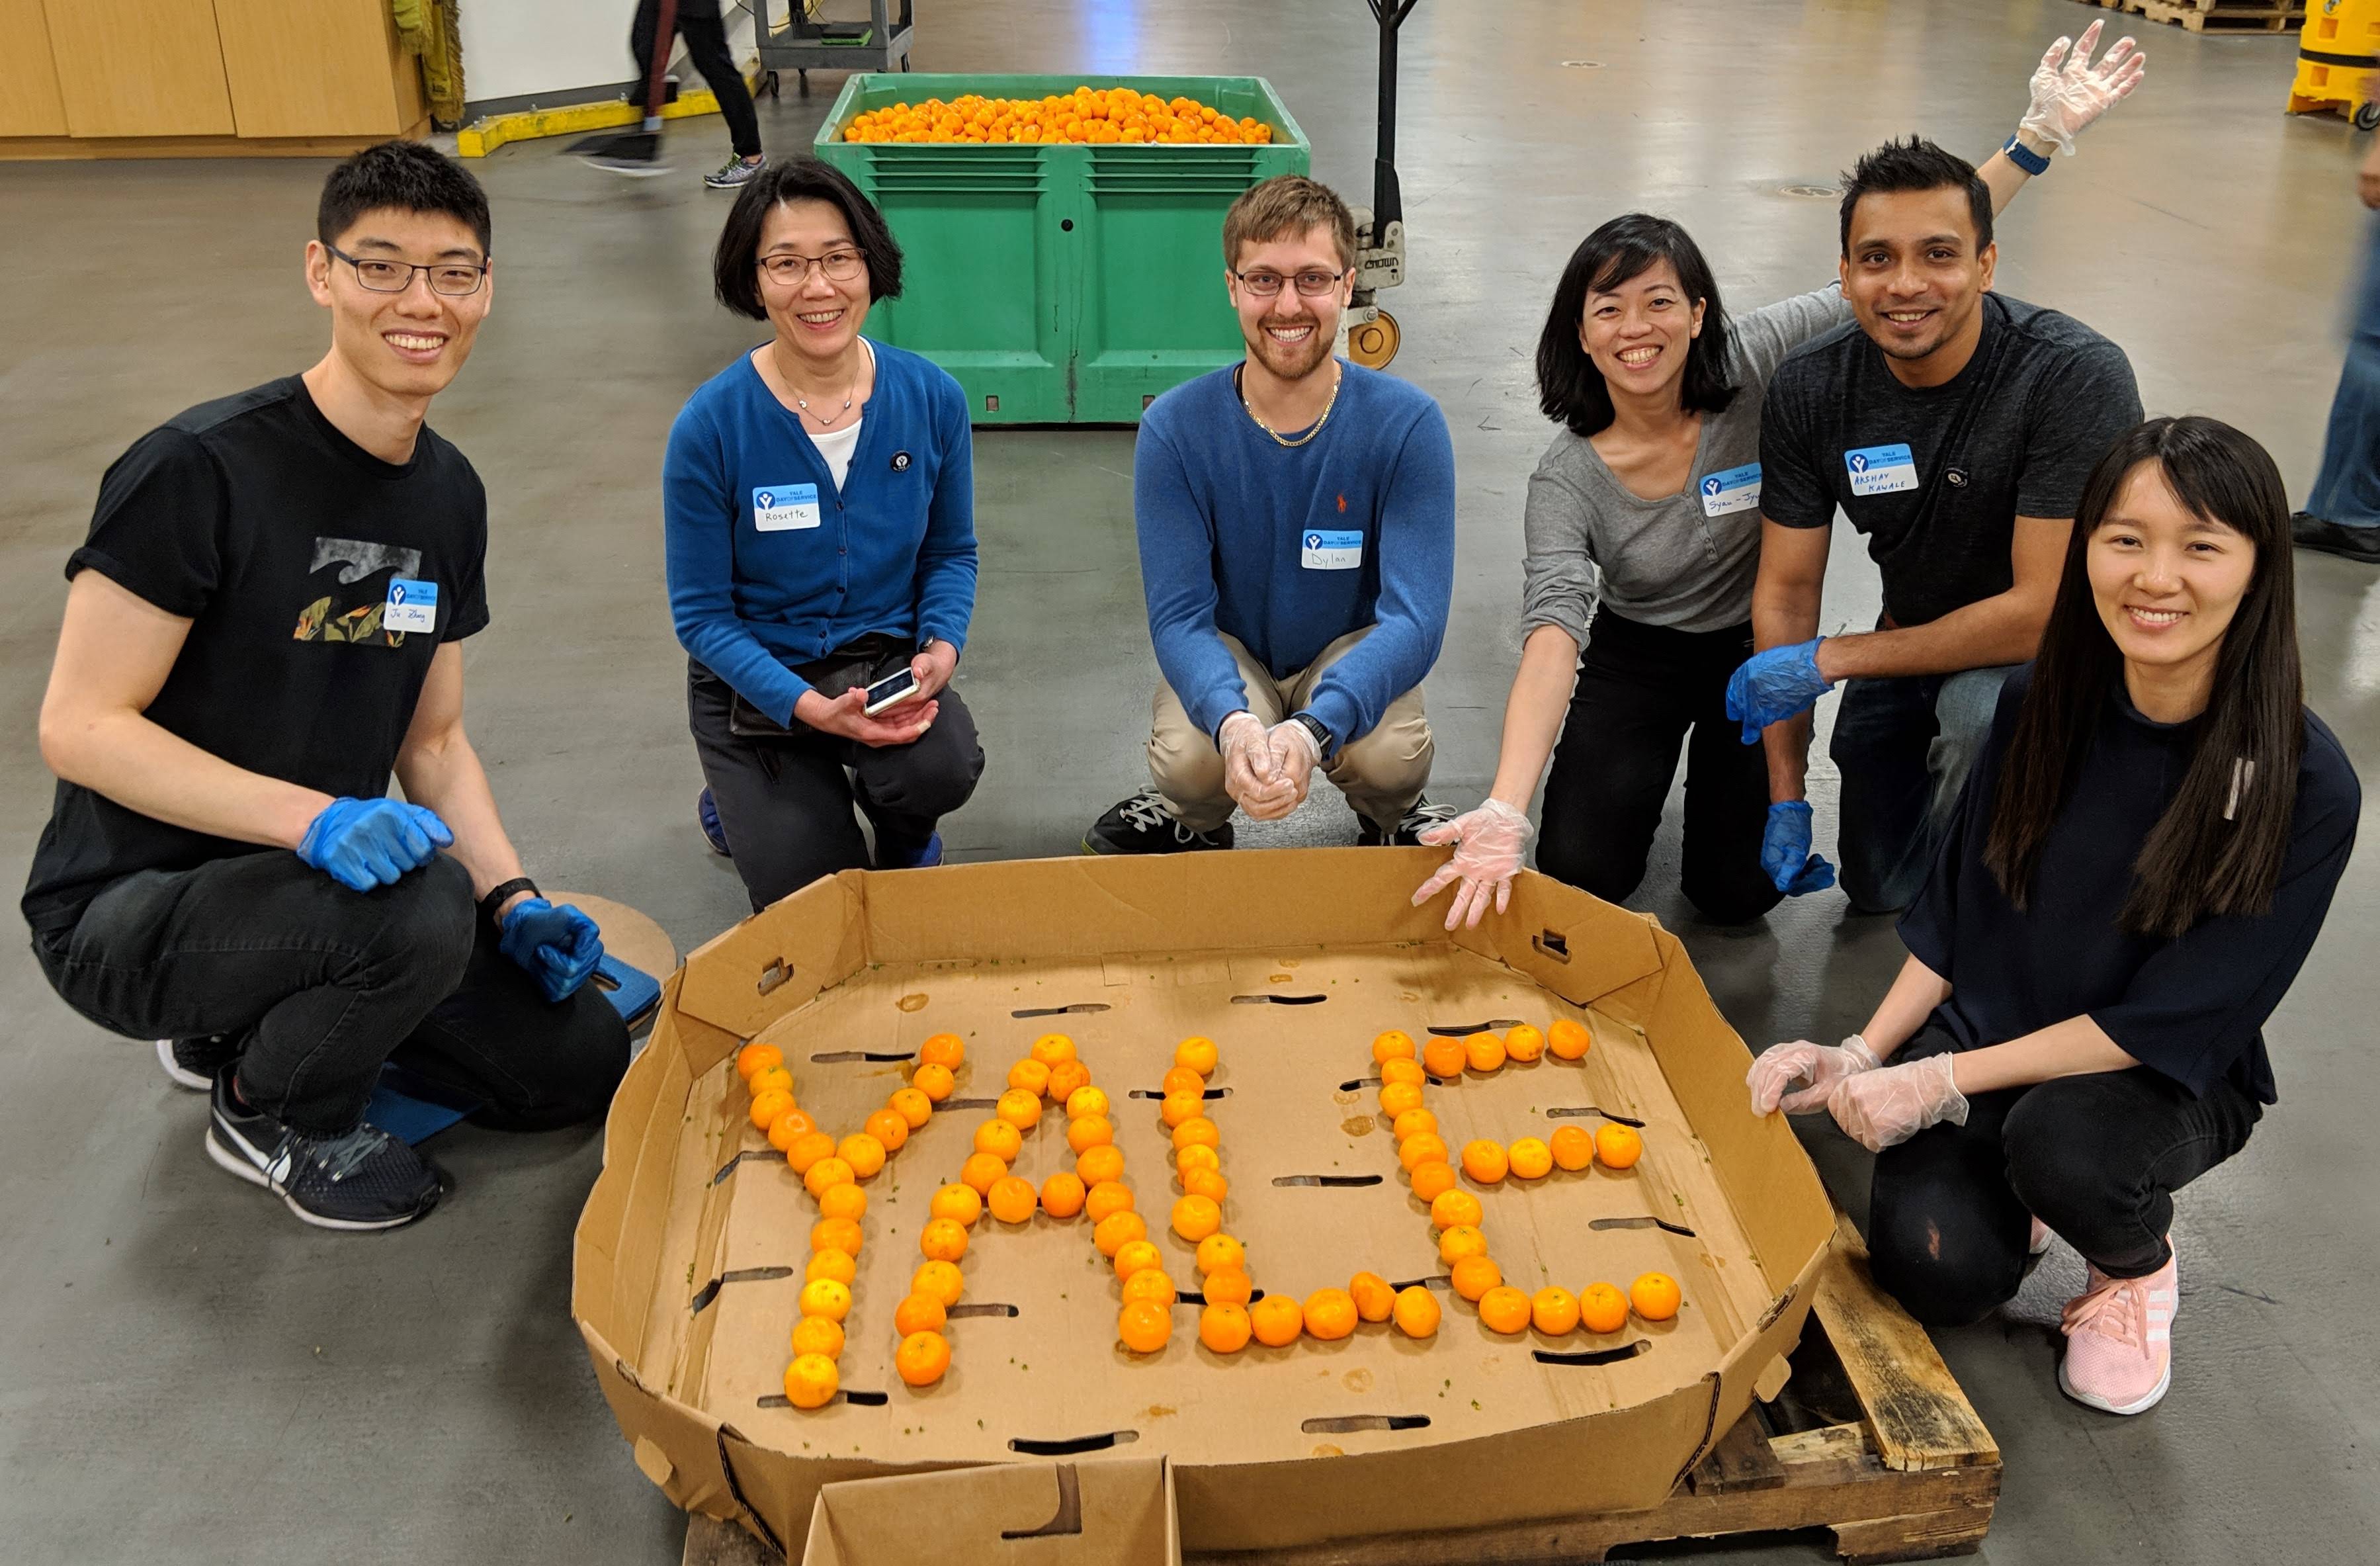 Yale Day of Service event